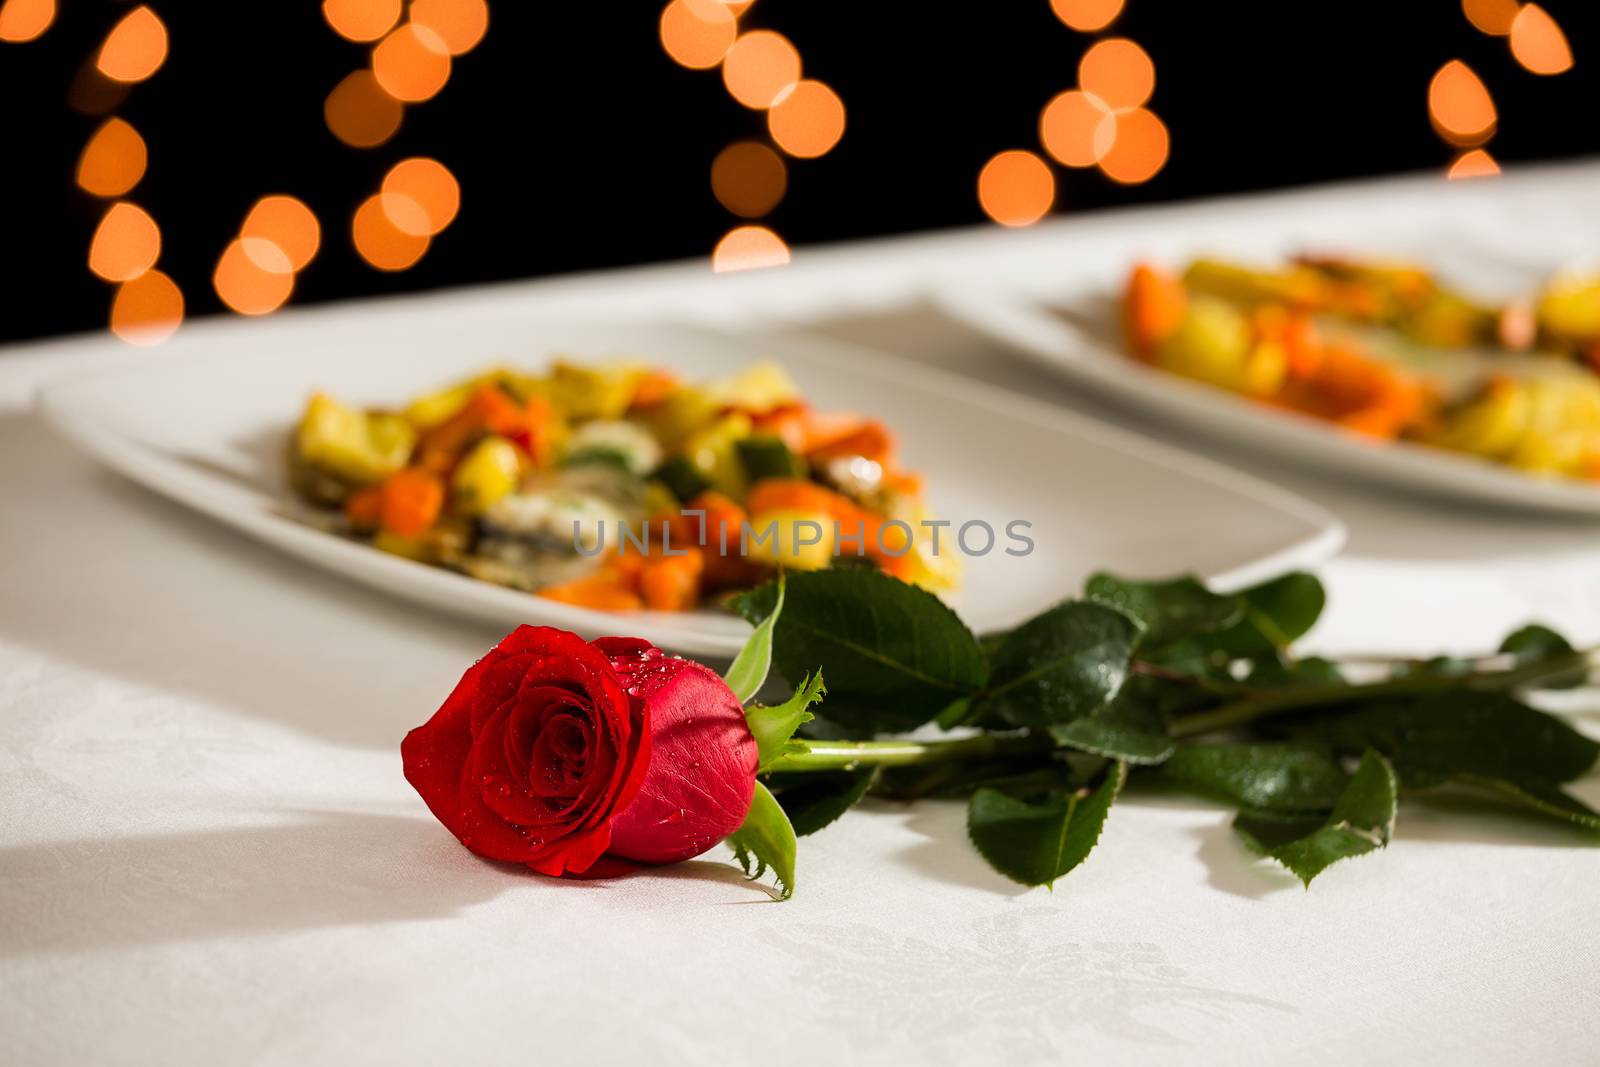 A rose to celebrate an important event at the restaurant